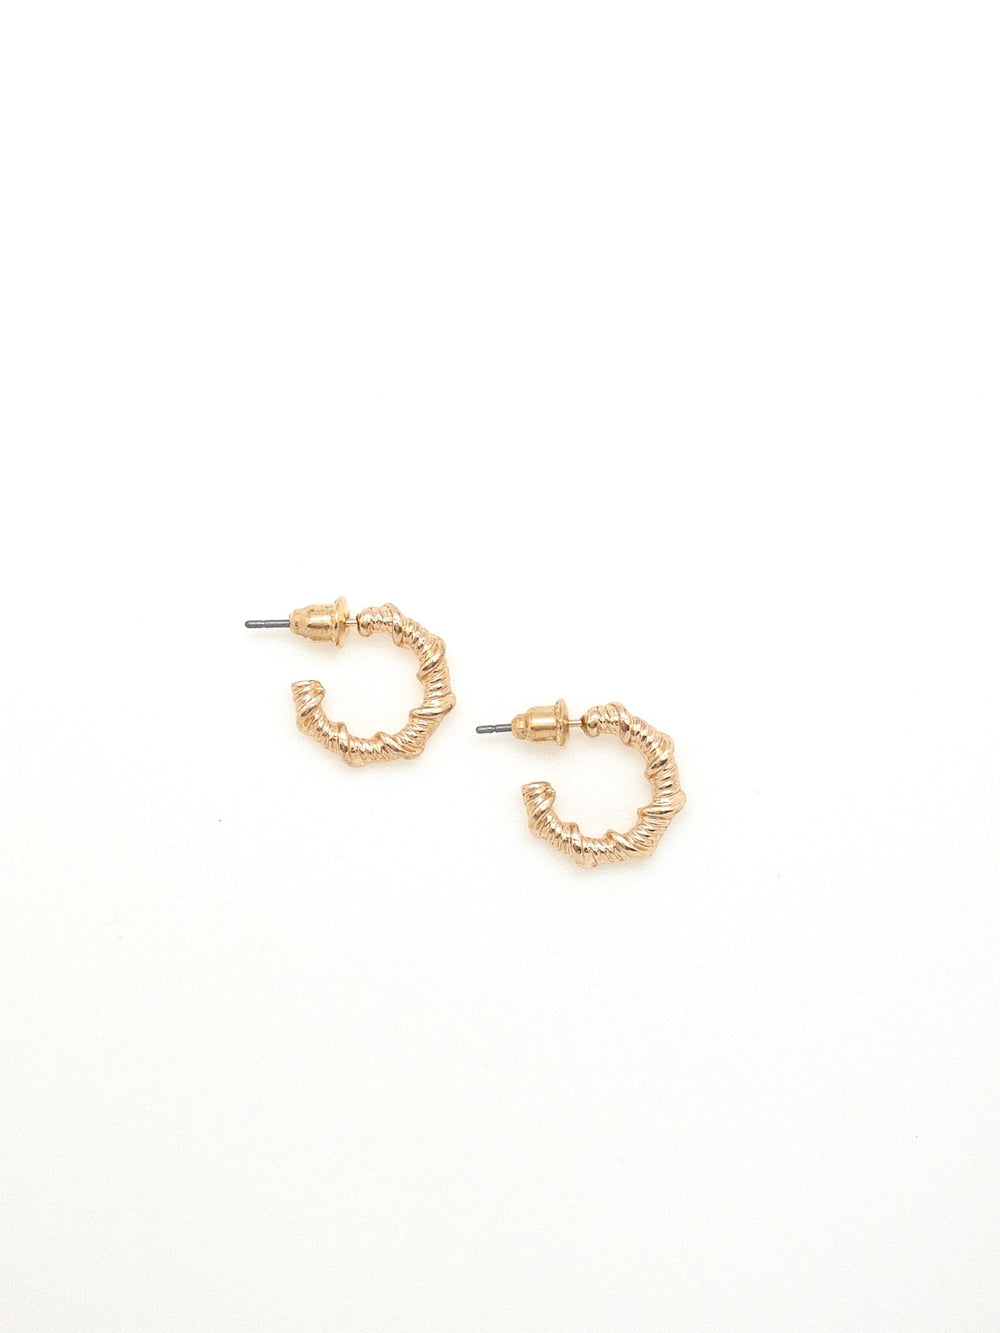 Gold Layla hoop earrings with a twisted rope detail